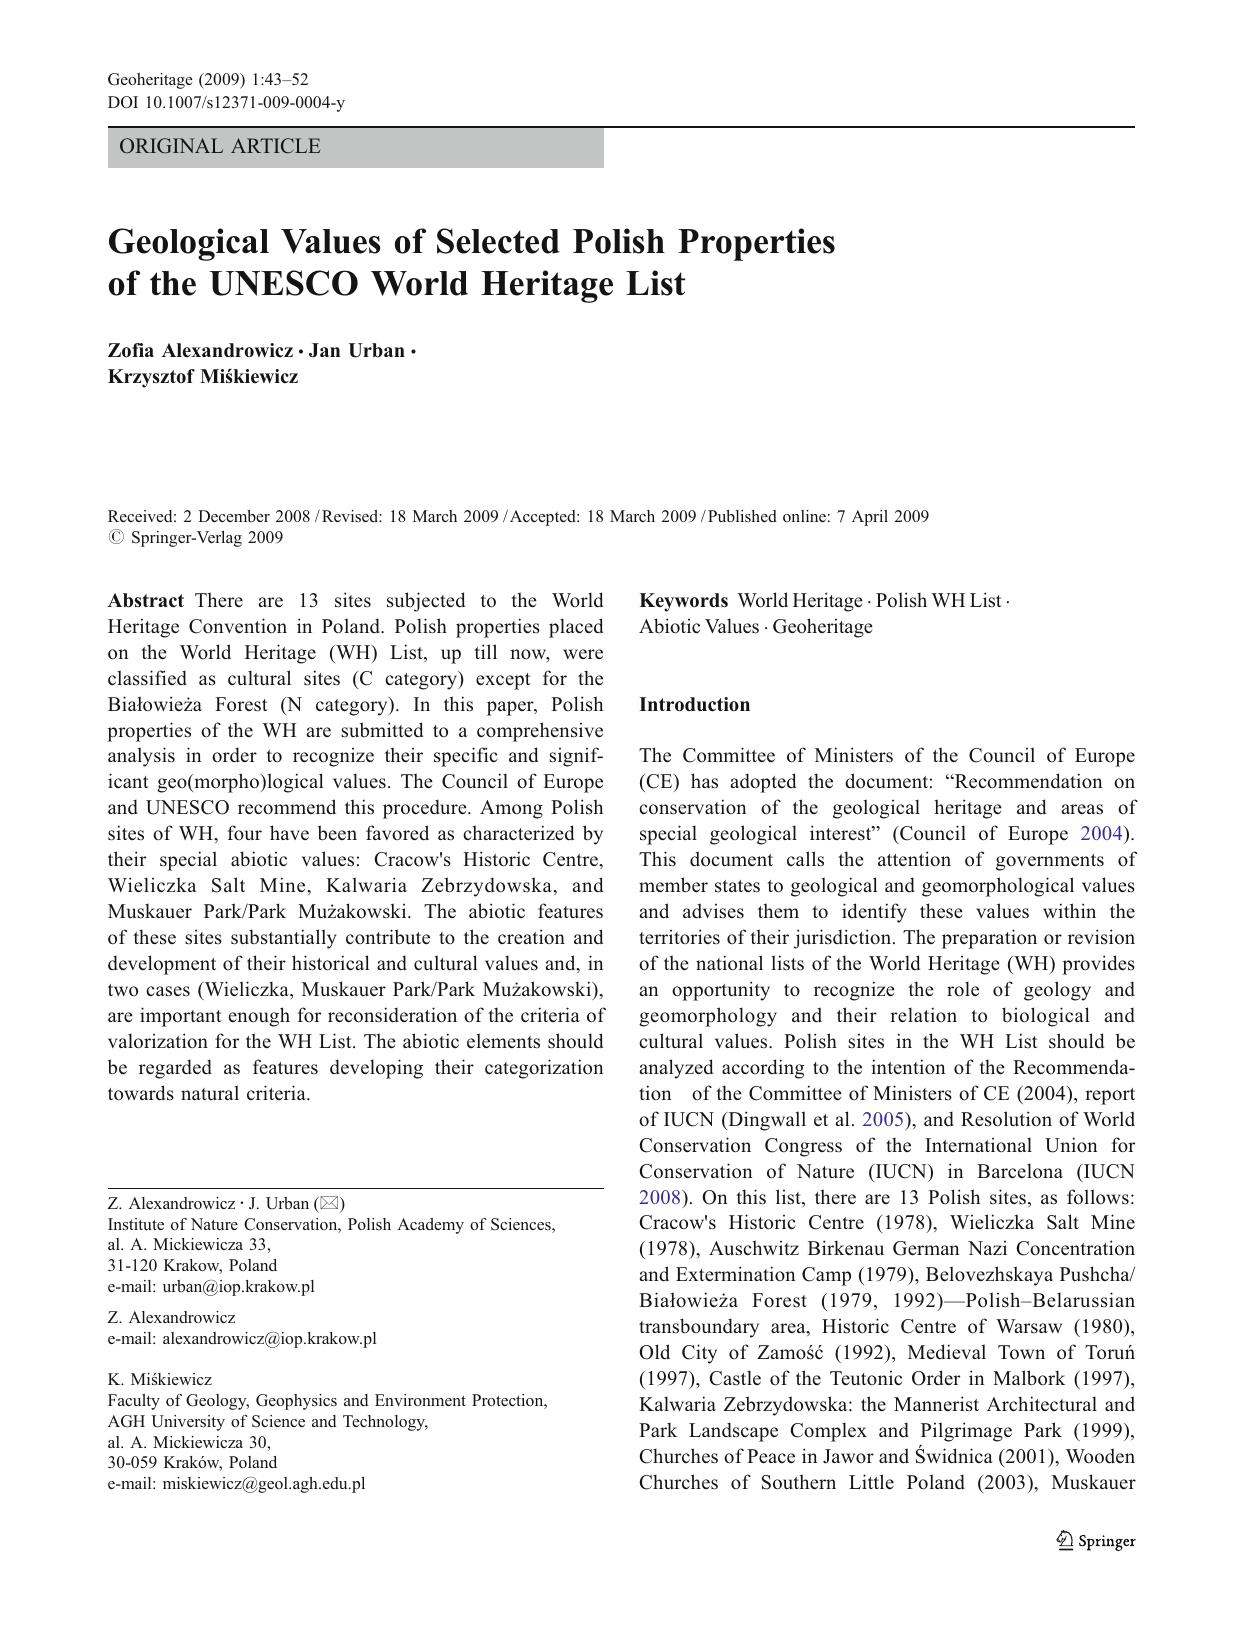 Geological Values of Selected Polish Properties. 2009